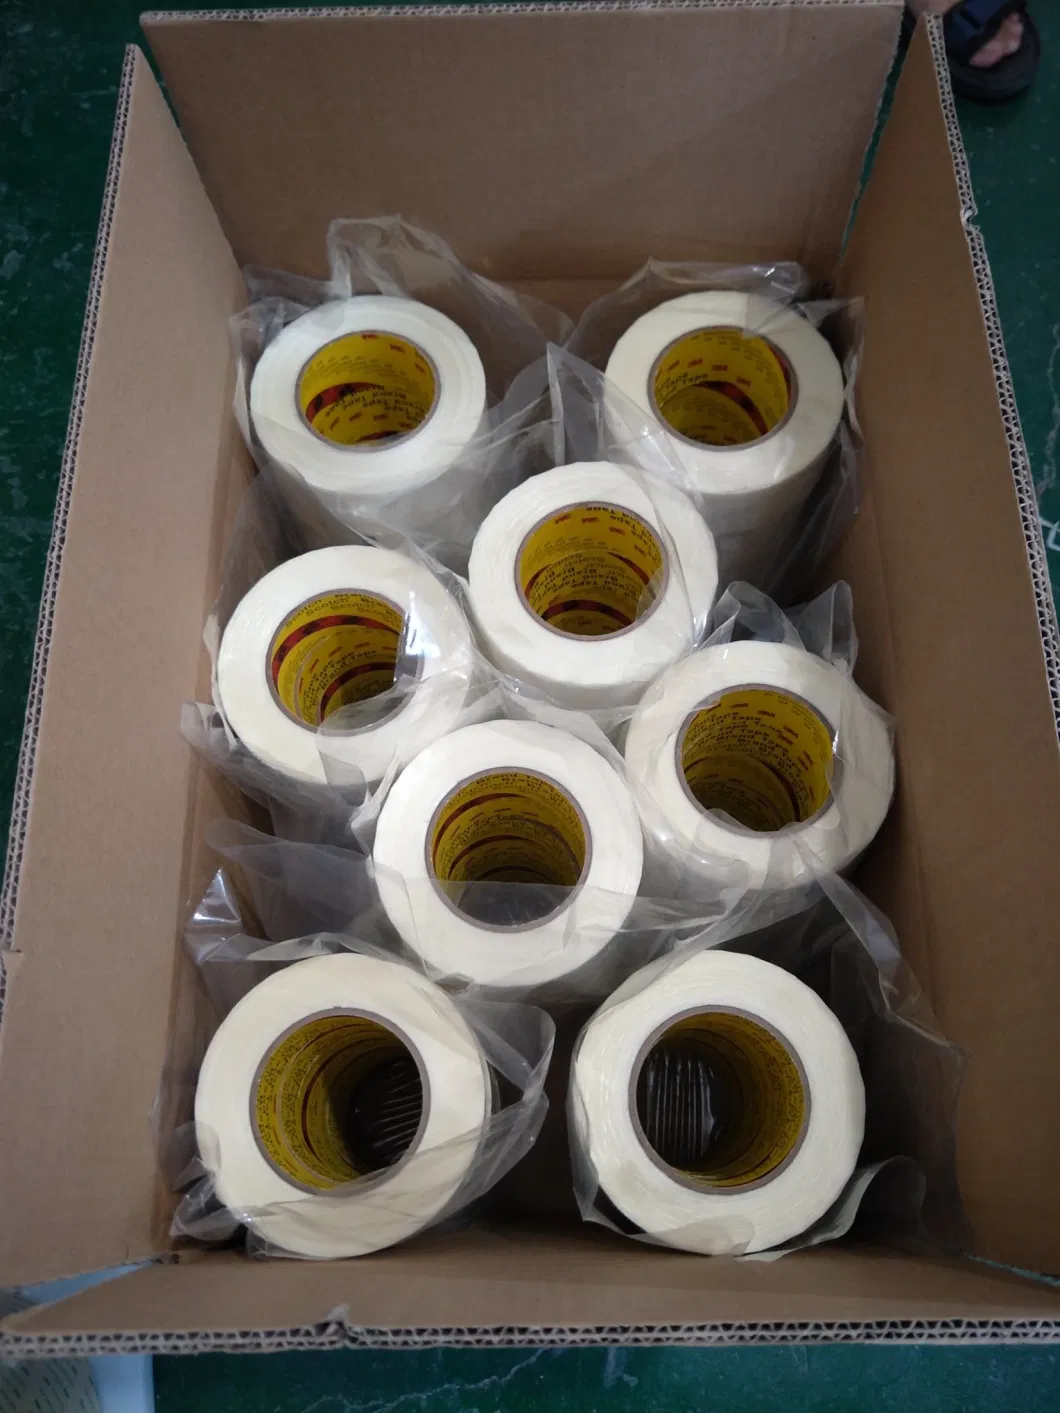 Heavy Duty Fiberglass Filament Tape 3m 898 Reinforced Filament Strapping Tape for Carton Box Packing